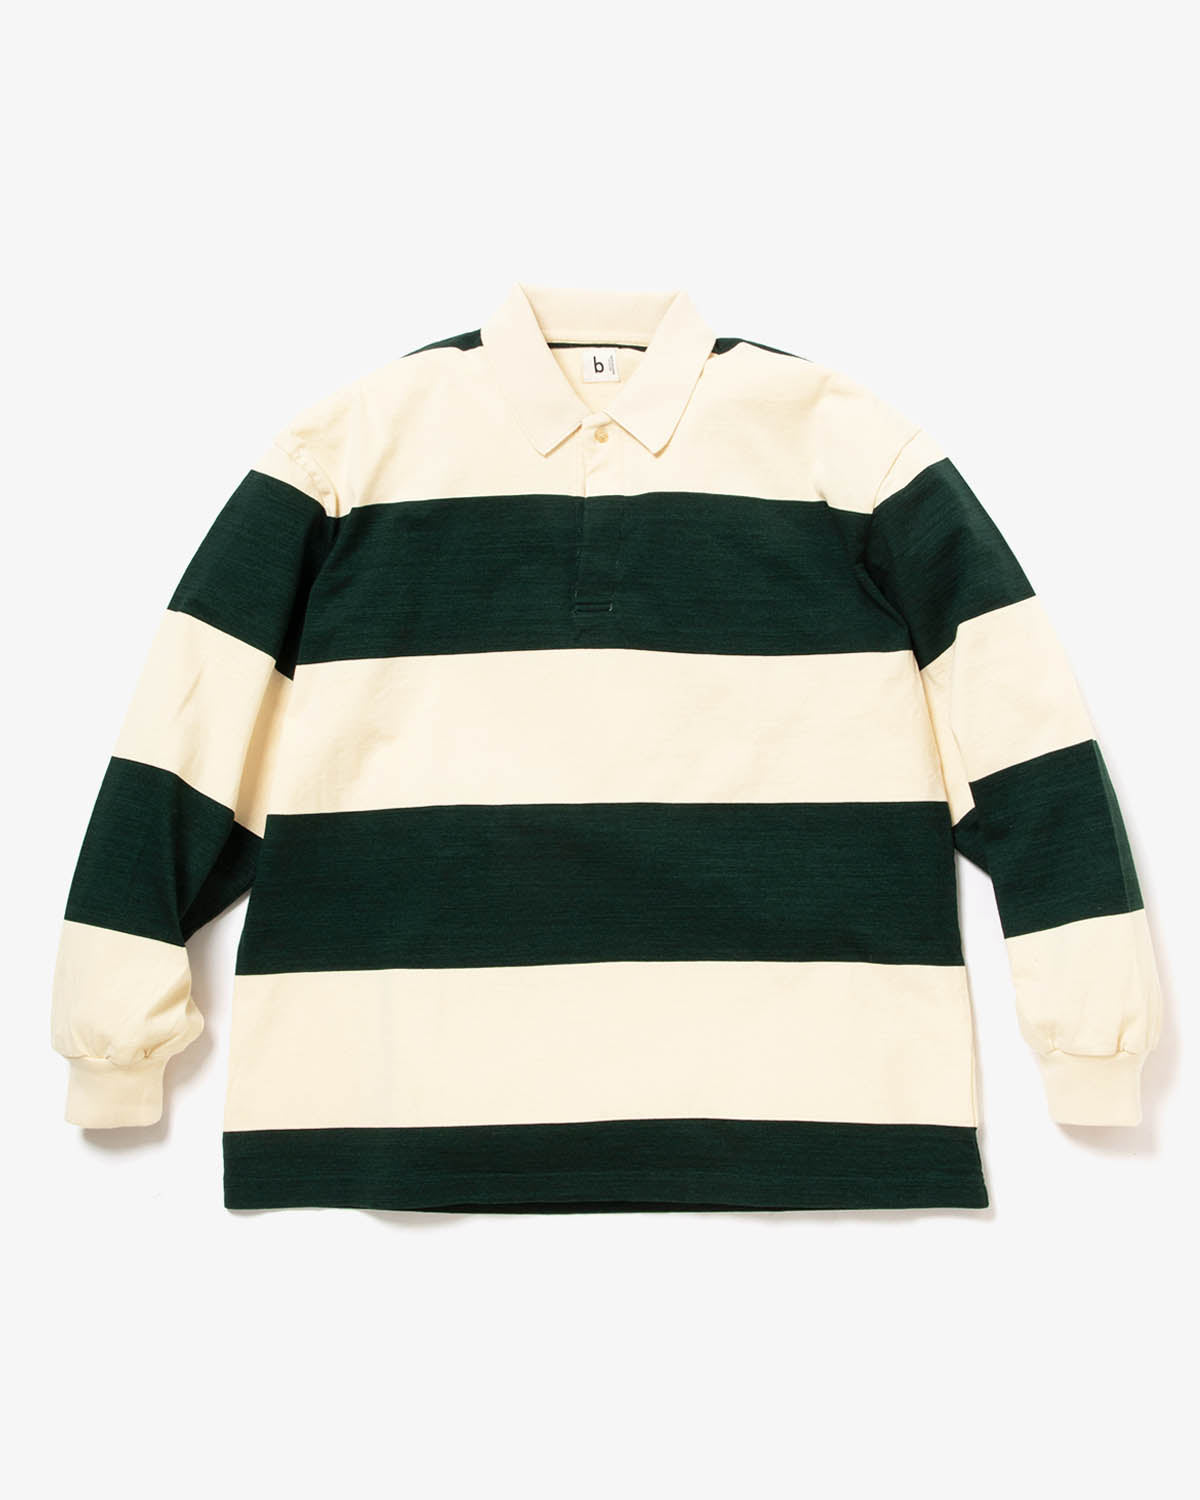 WIDE BORDER RUGBY SHIRT